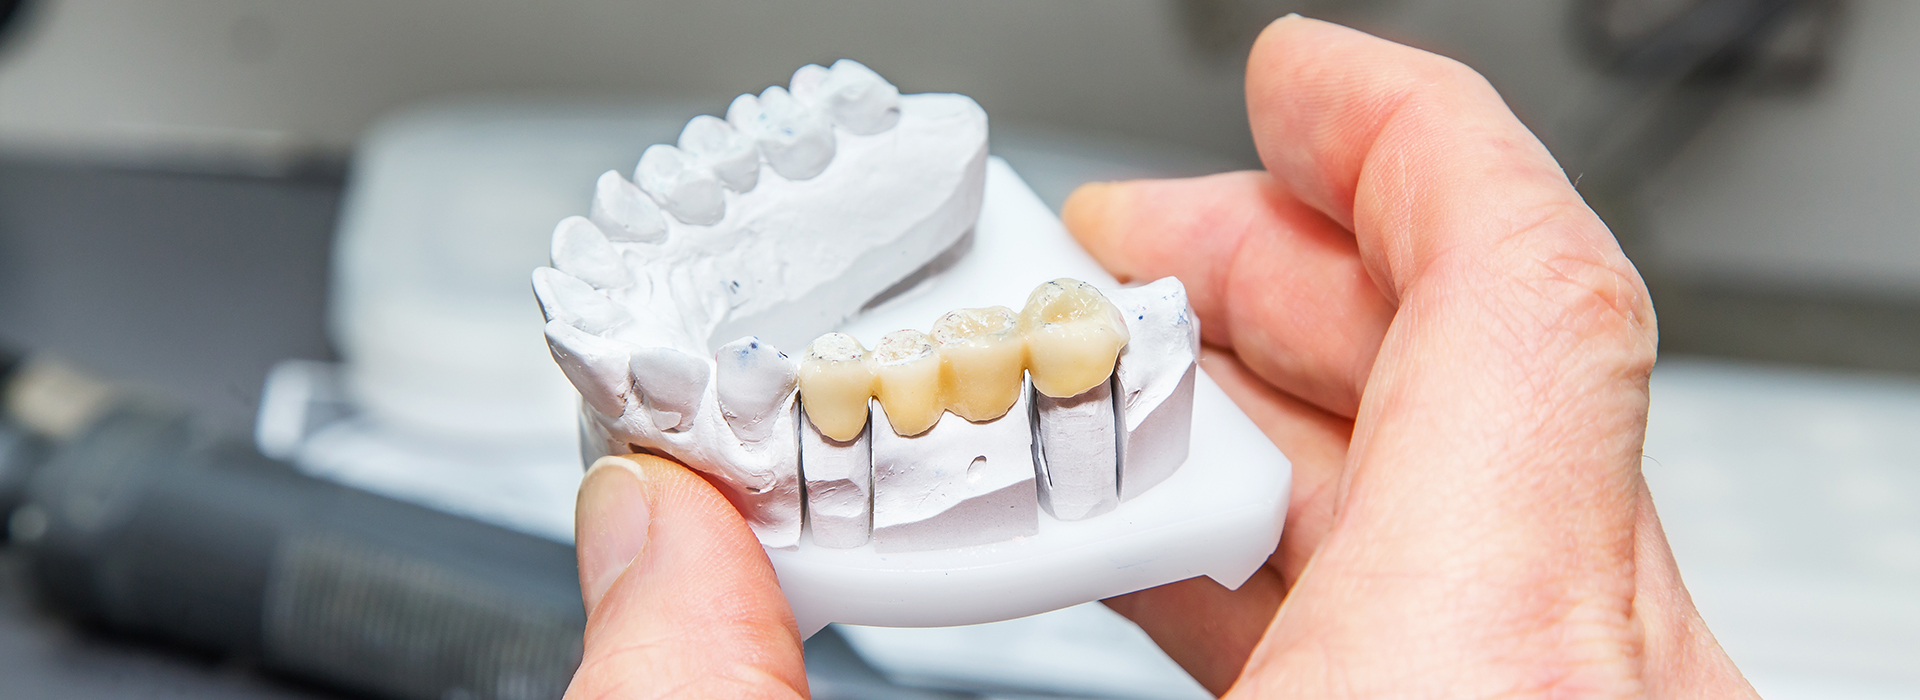 A person holding a 3D printed dental implant model.